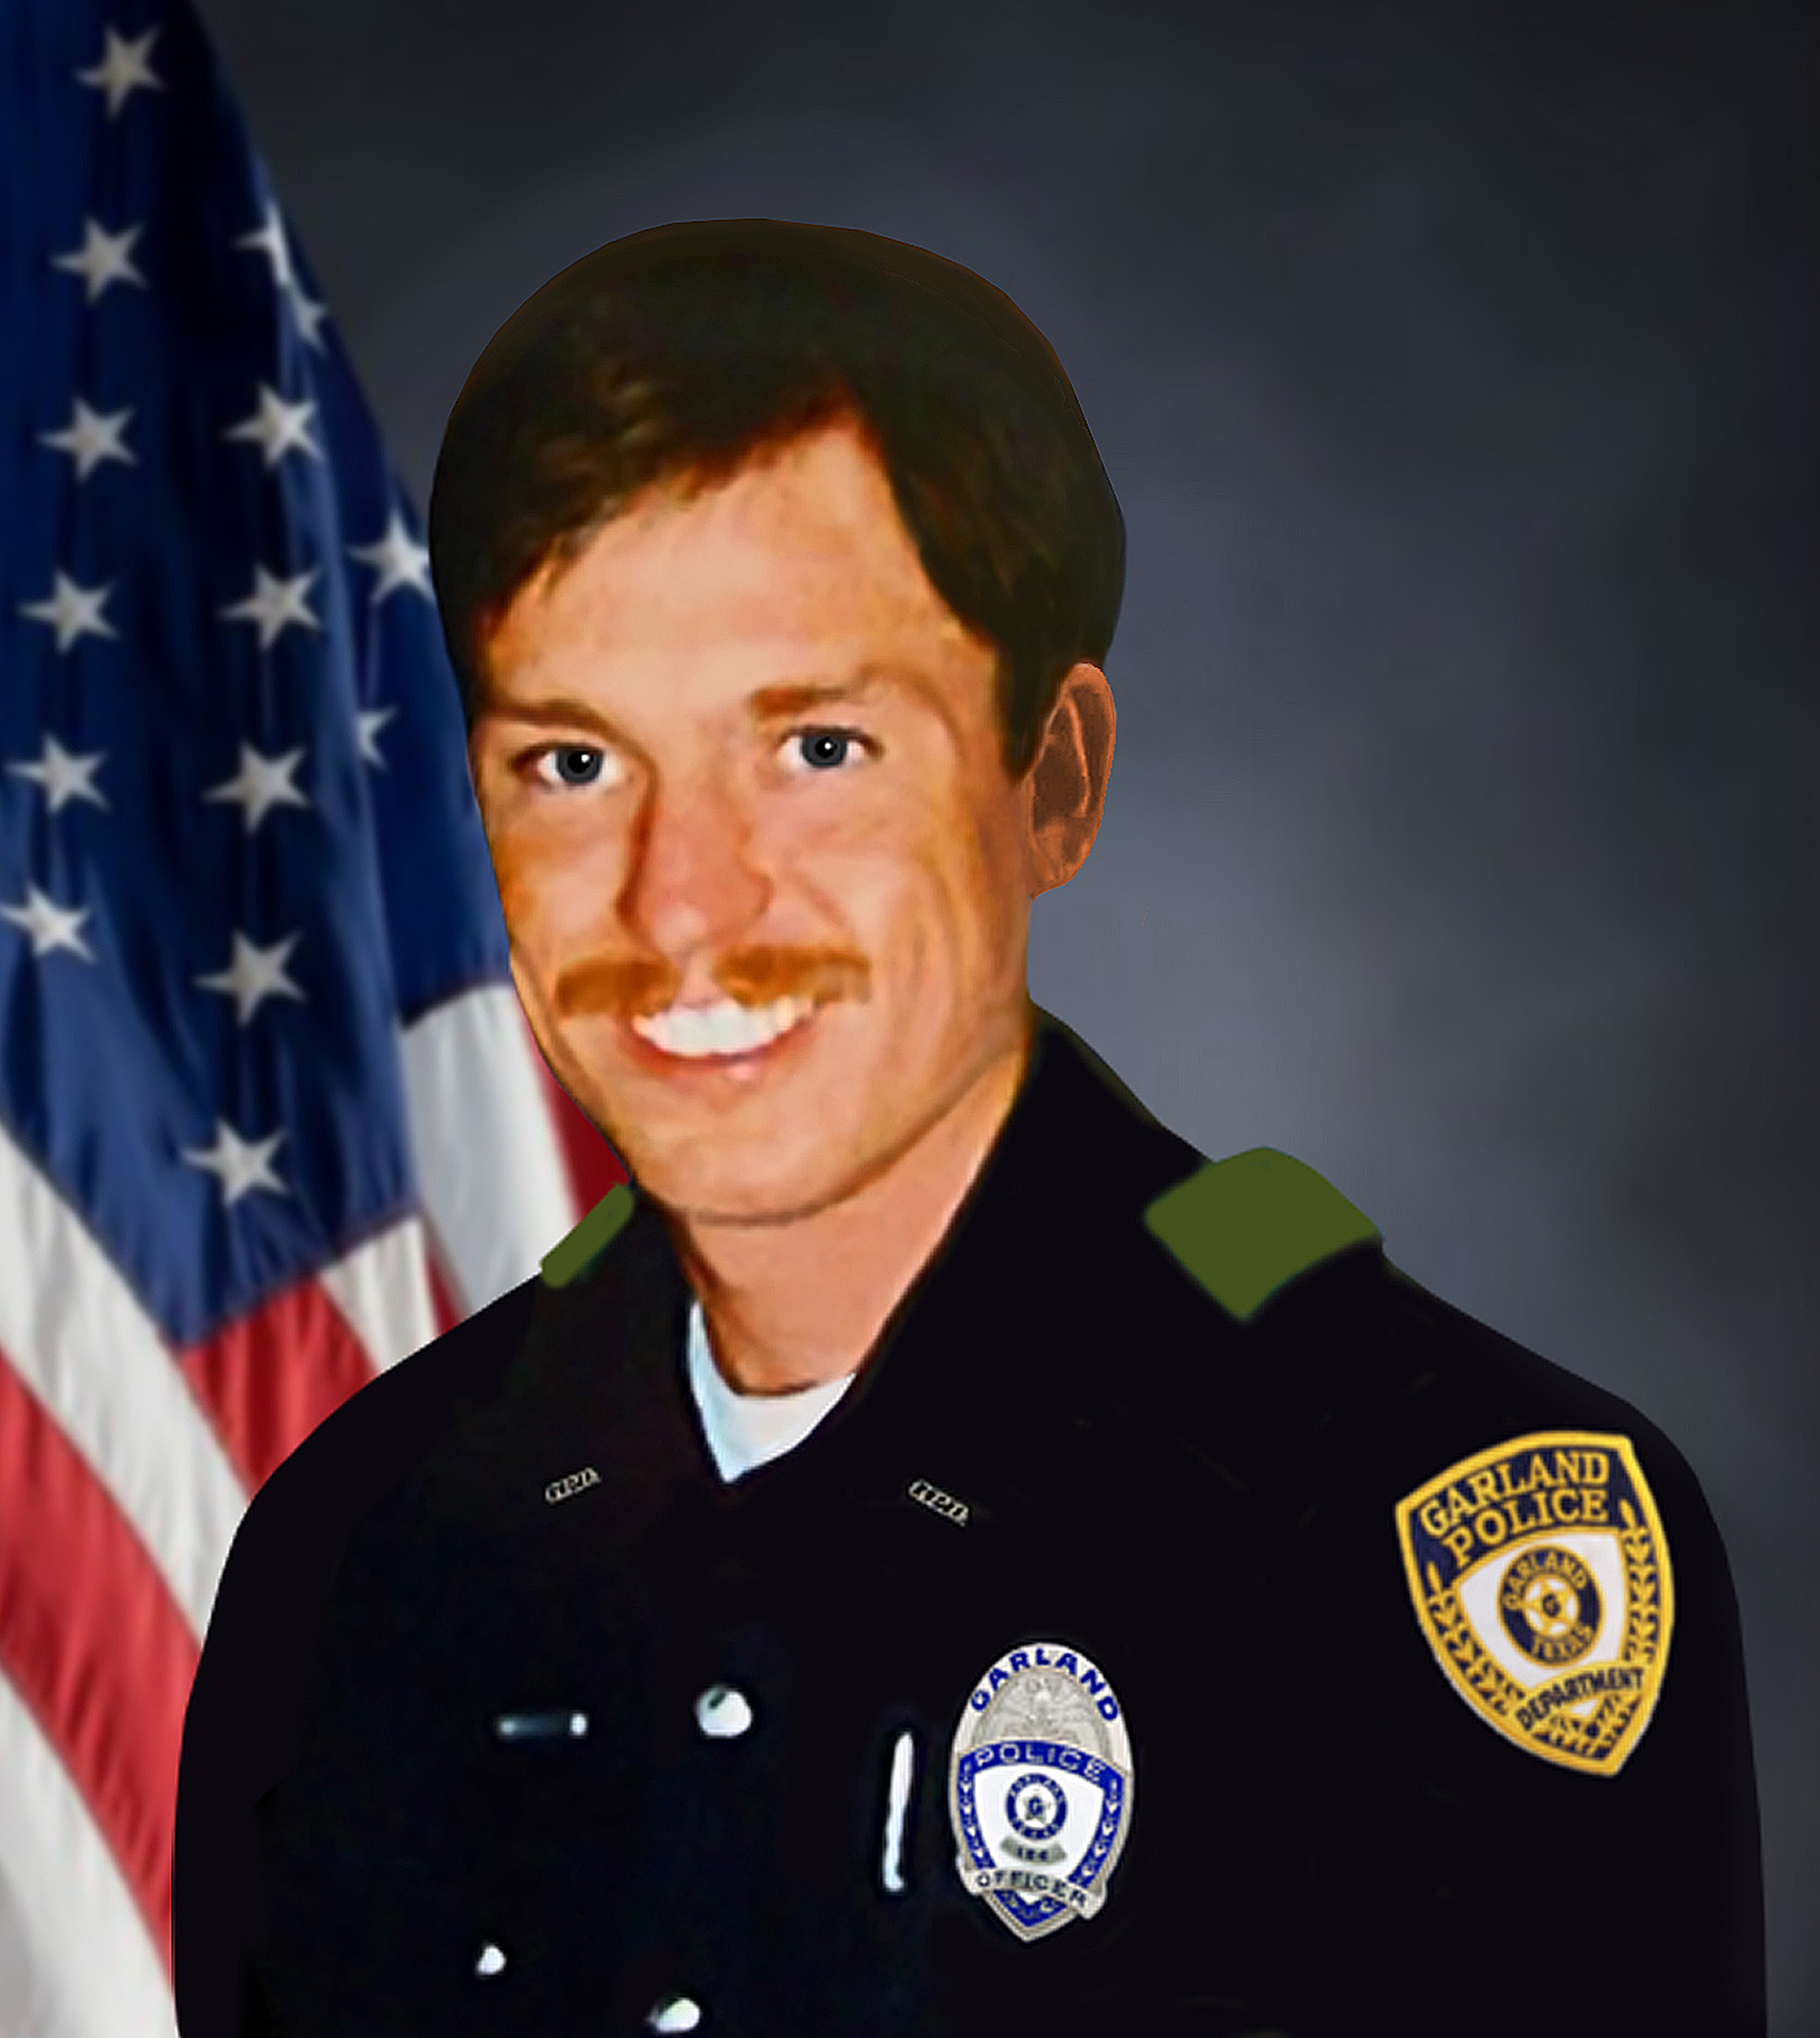 Police Officer Michael David Moore | Garland Police Department, Texas